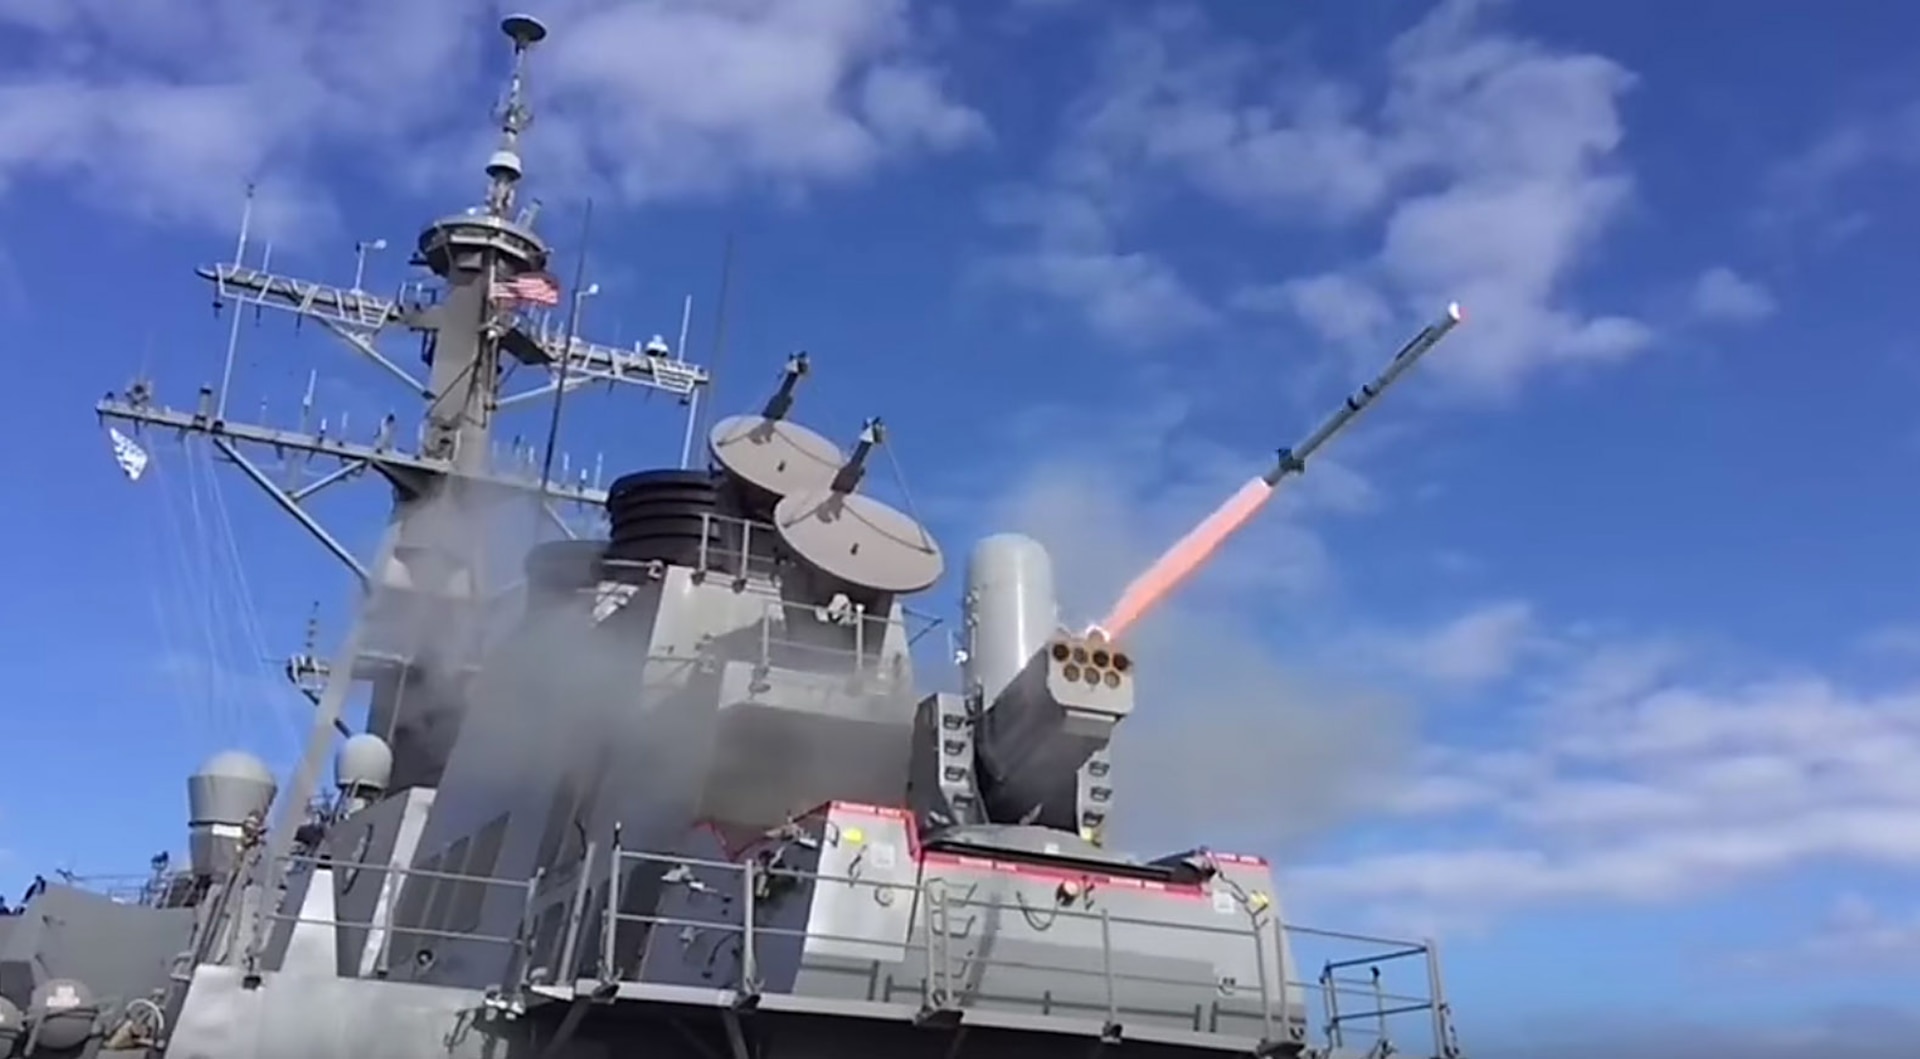 160304-N-AL577-001 ATLANTIC OCEAN (March 4, 2016) SeaRAM, a new system for guided-missile destroyers, is test fired March 4, 2016 from the guided-missile destroyer USS Porter (DDG 78). Porter is forward-deployed to Rota, Spain, and is preparing for deployment in the U.S. 6th Fleet area of operations in support of U.S. national security interests in Europe. 